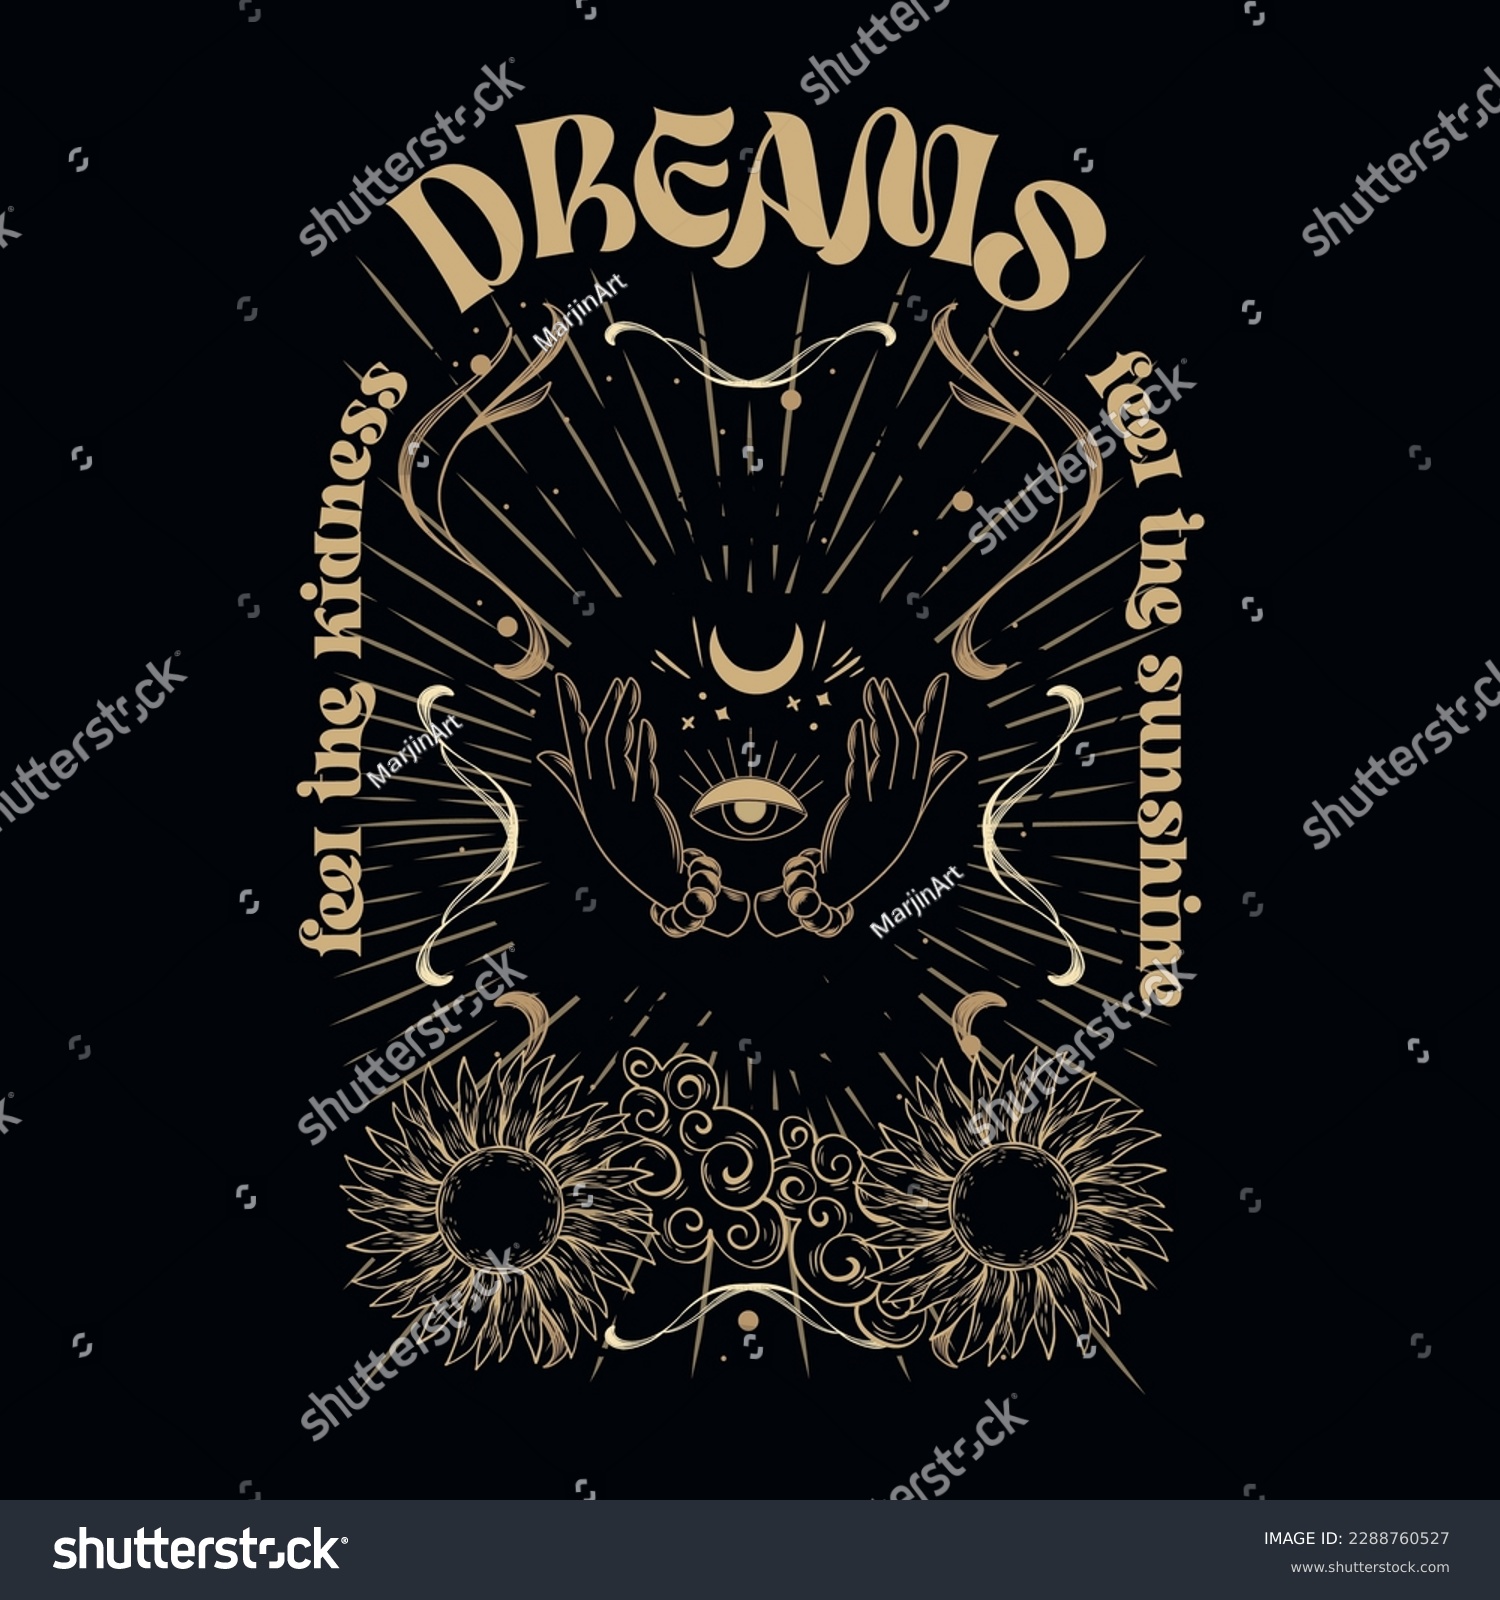 Dreams slogan with hand and moon illustration for t shirt print design or other uses - Vector #2288760527